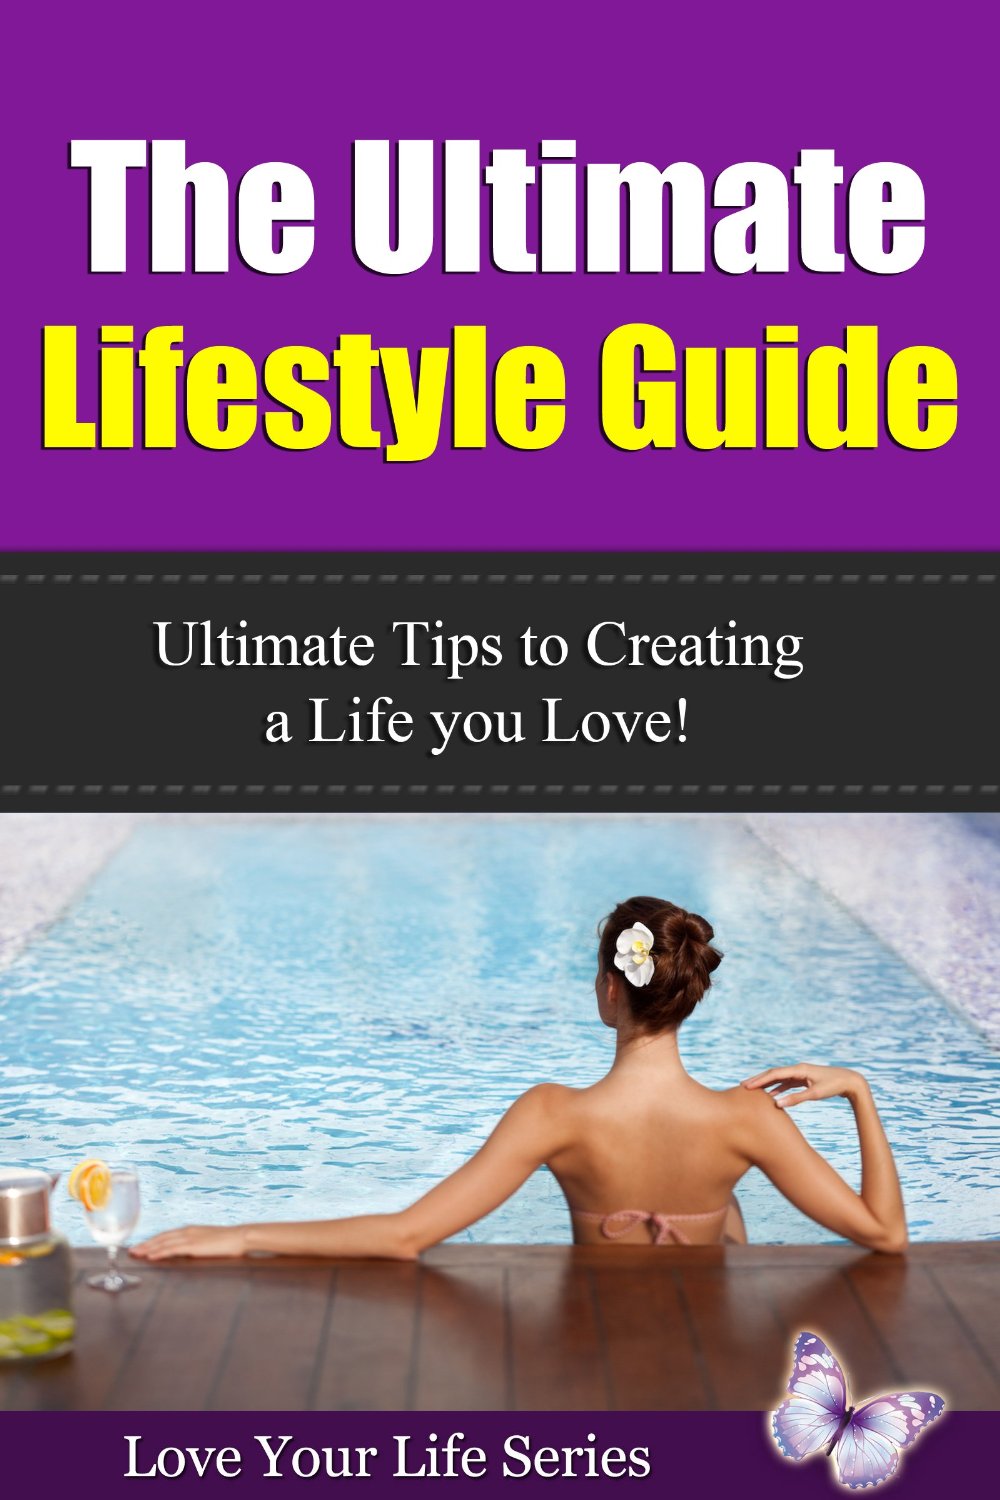 The Ultimate Lifestyle Guide: Ultimate Tips to Creating a Life you Love! by Simone Lea